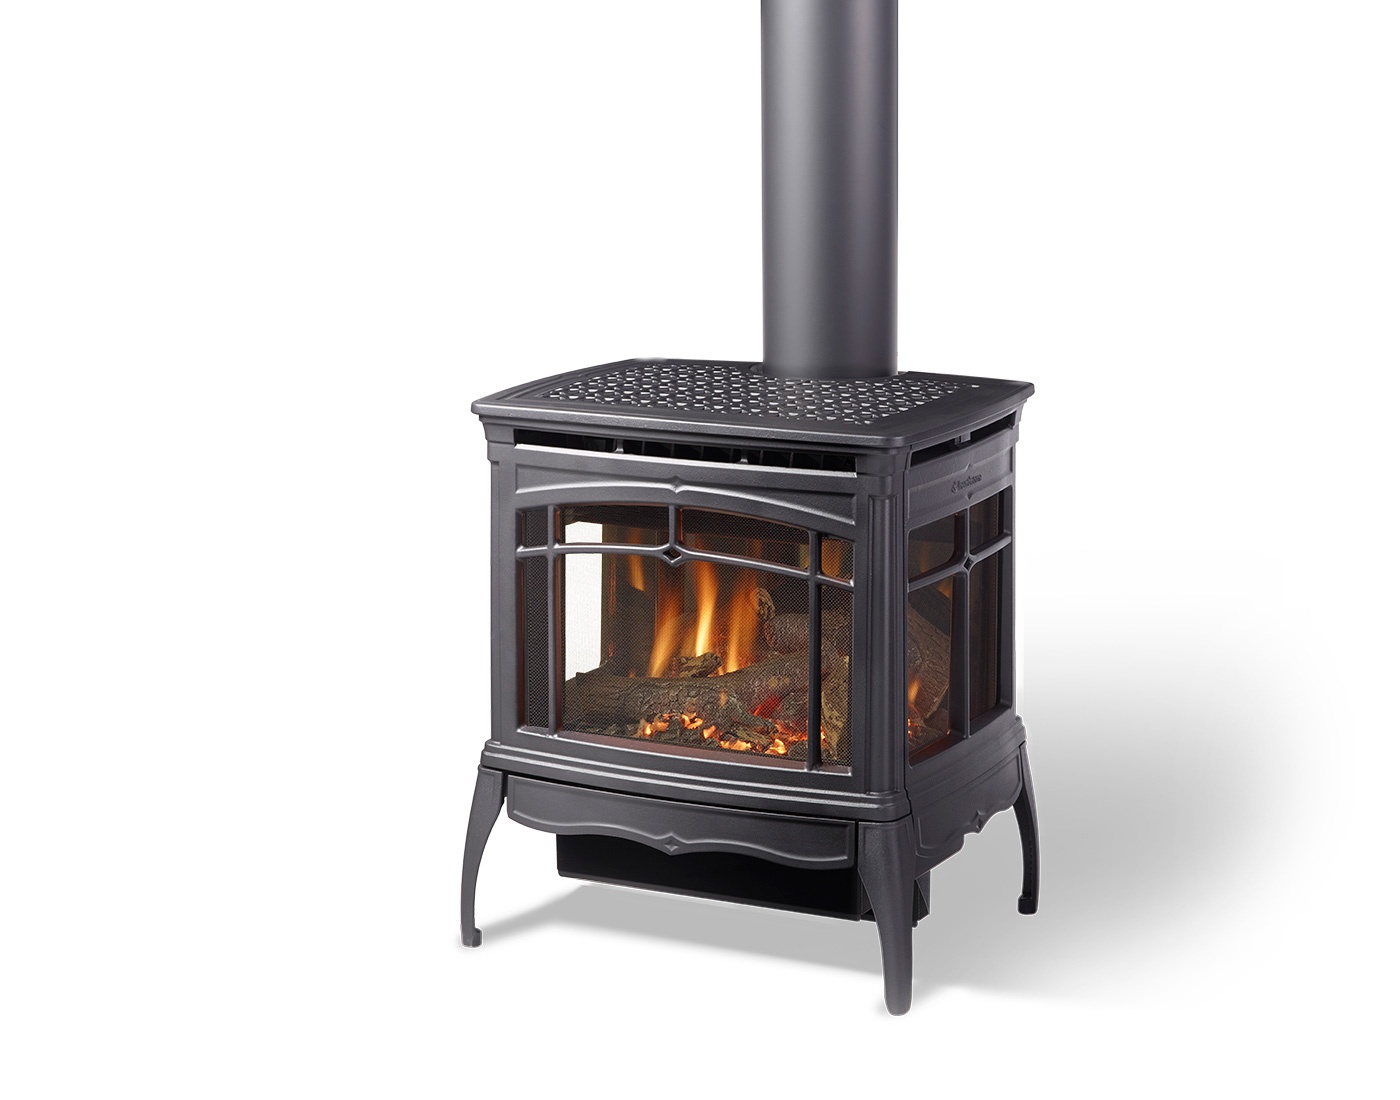 Bristol Dx Hearthstone Stoves, Gas Burner For Cast Iron Fireplace